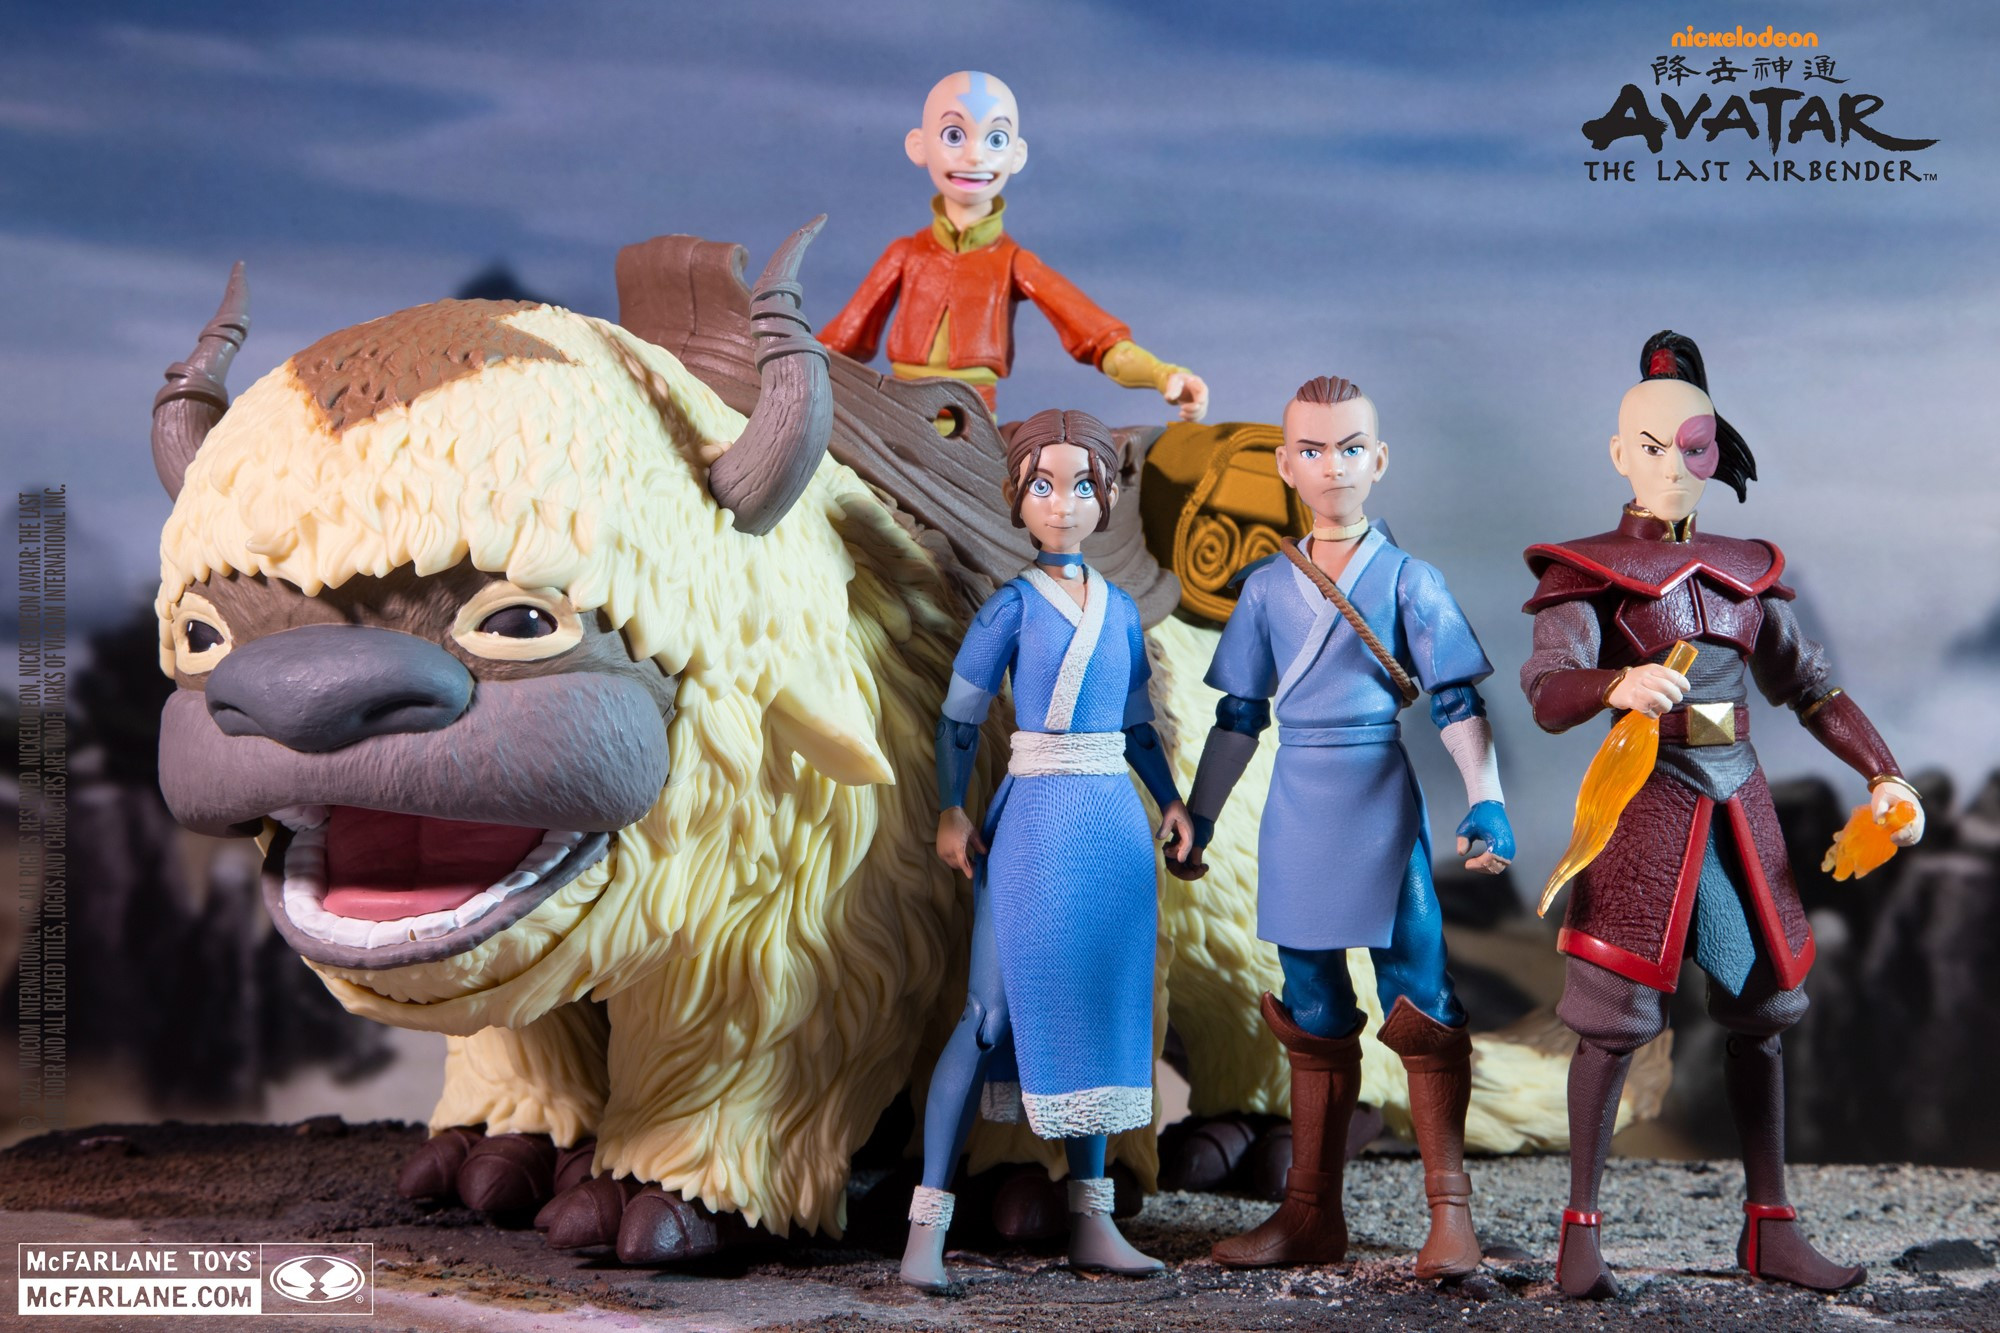 Avatar The Last Airbender - Aang, Katara, Sokka and Zuko - Engineering, revisions and joint articulation work across all 4 figures with varying levels of involvement. I also worked on joint engineering for the 7in version of Aang as well